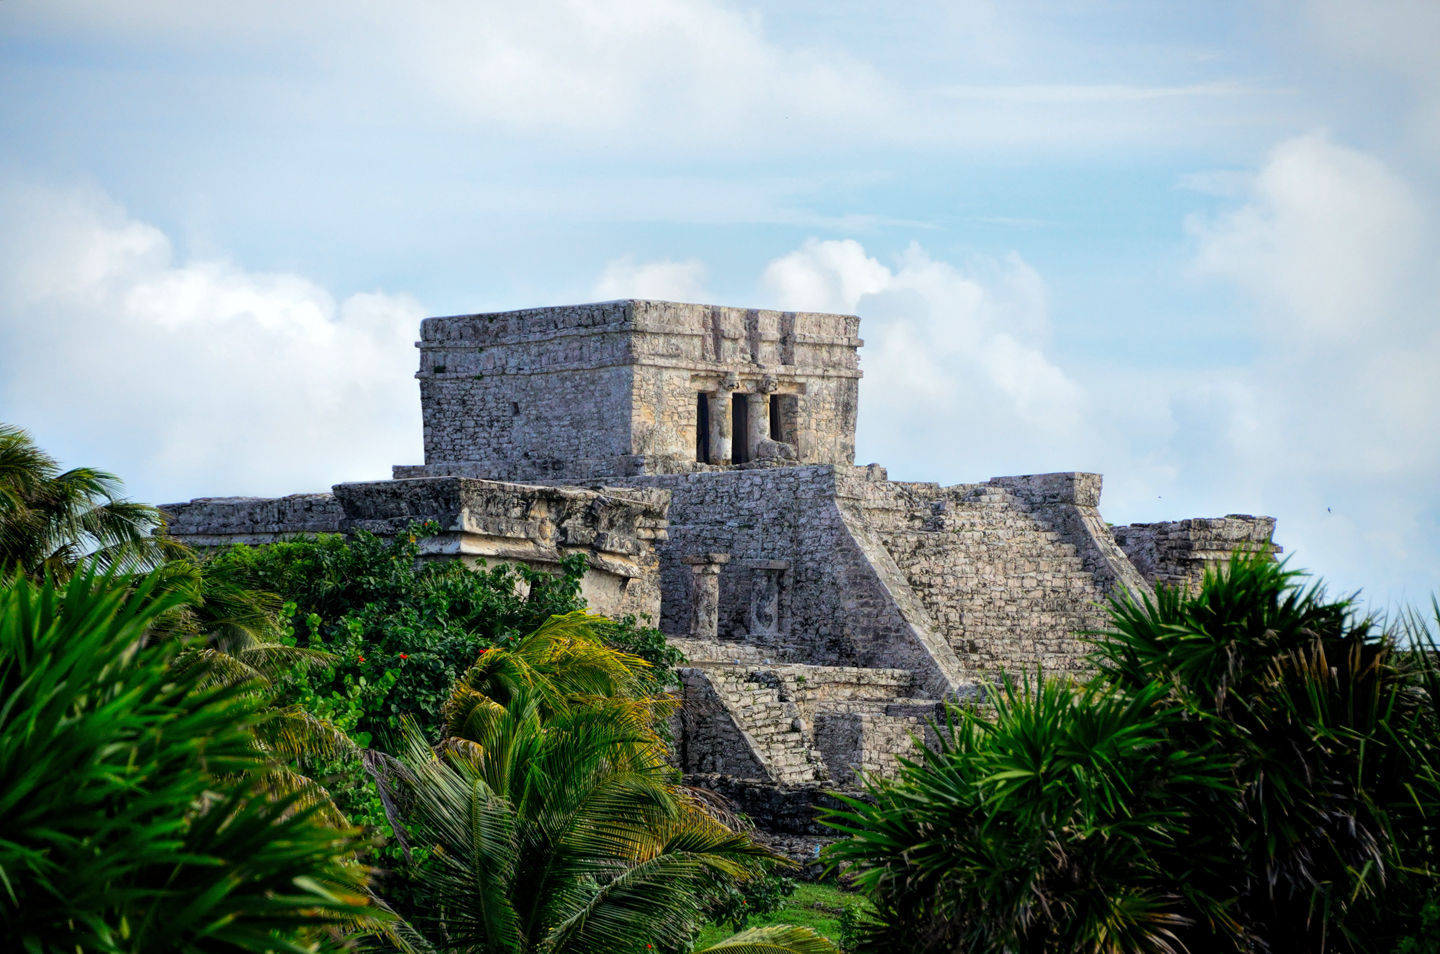 Tulum: The Mayan City by the Sea